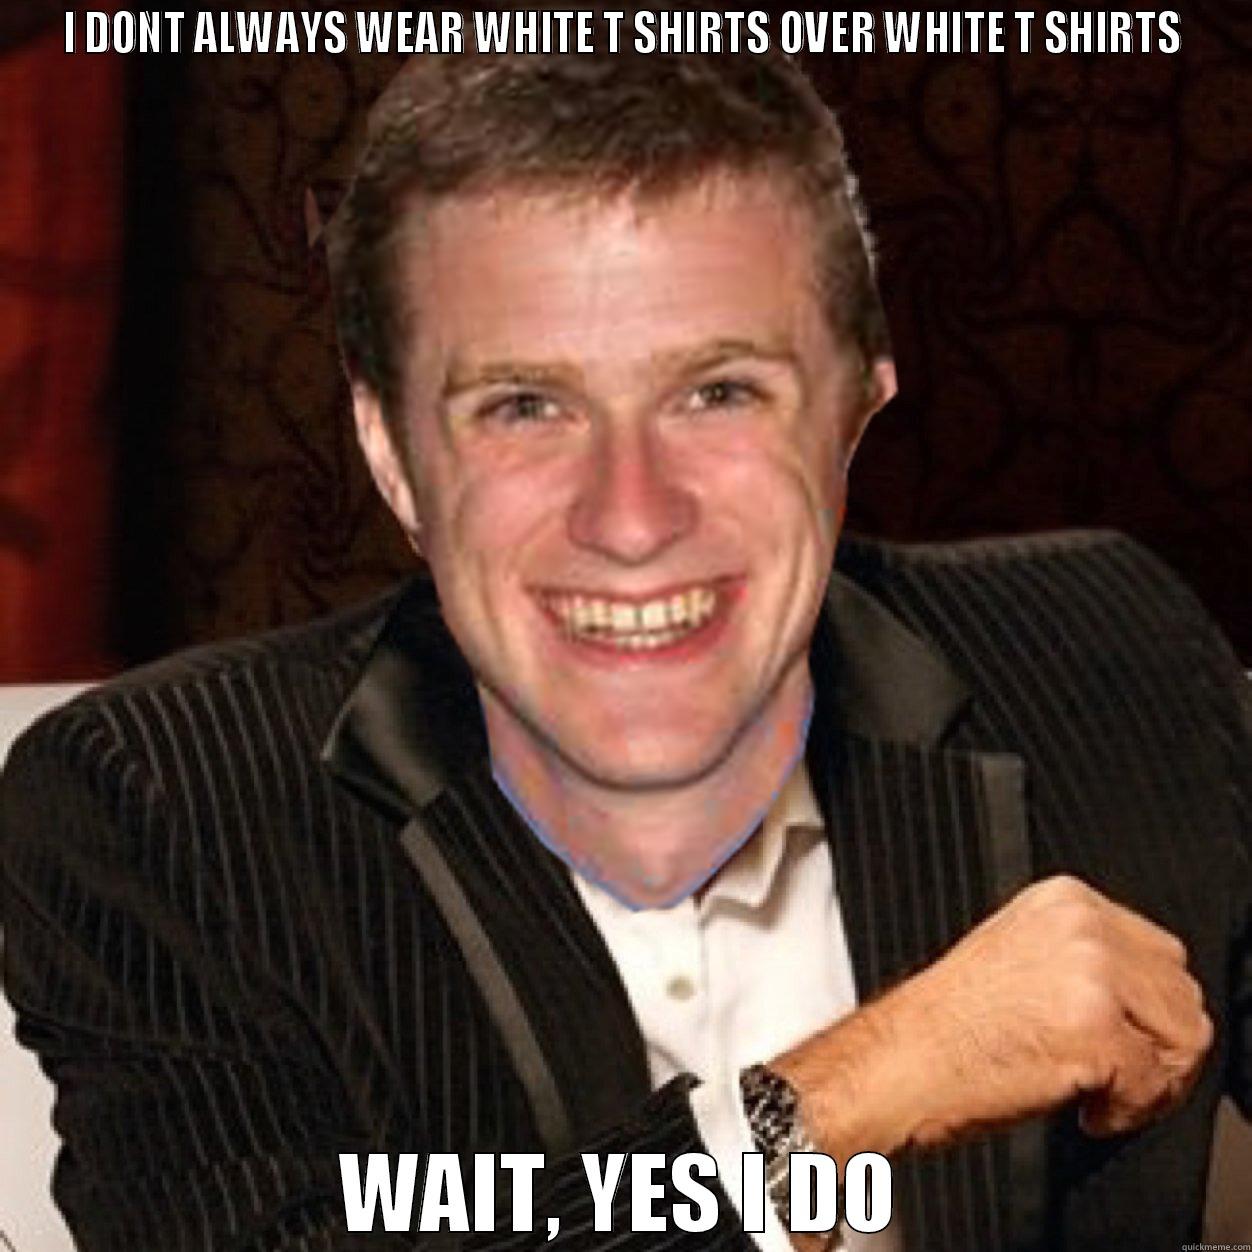 phil dos equis - I DONT ALWAYS WEAR WHITE T SHIRTS OVER WHITE T SHIRTS WAIT, YES I DO Misc